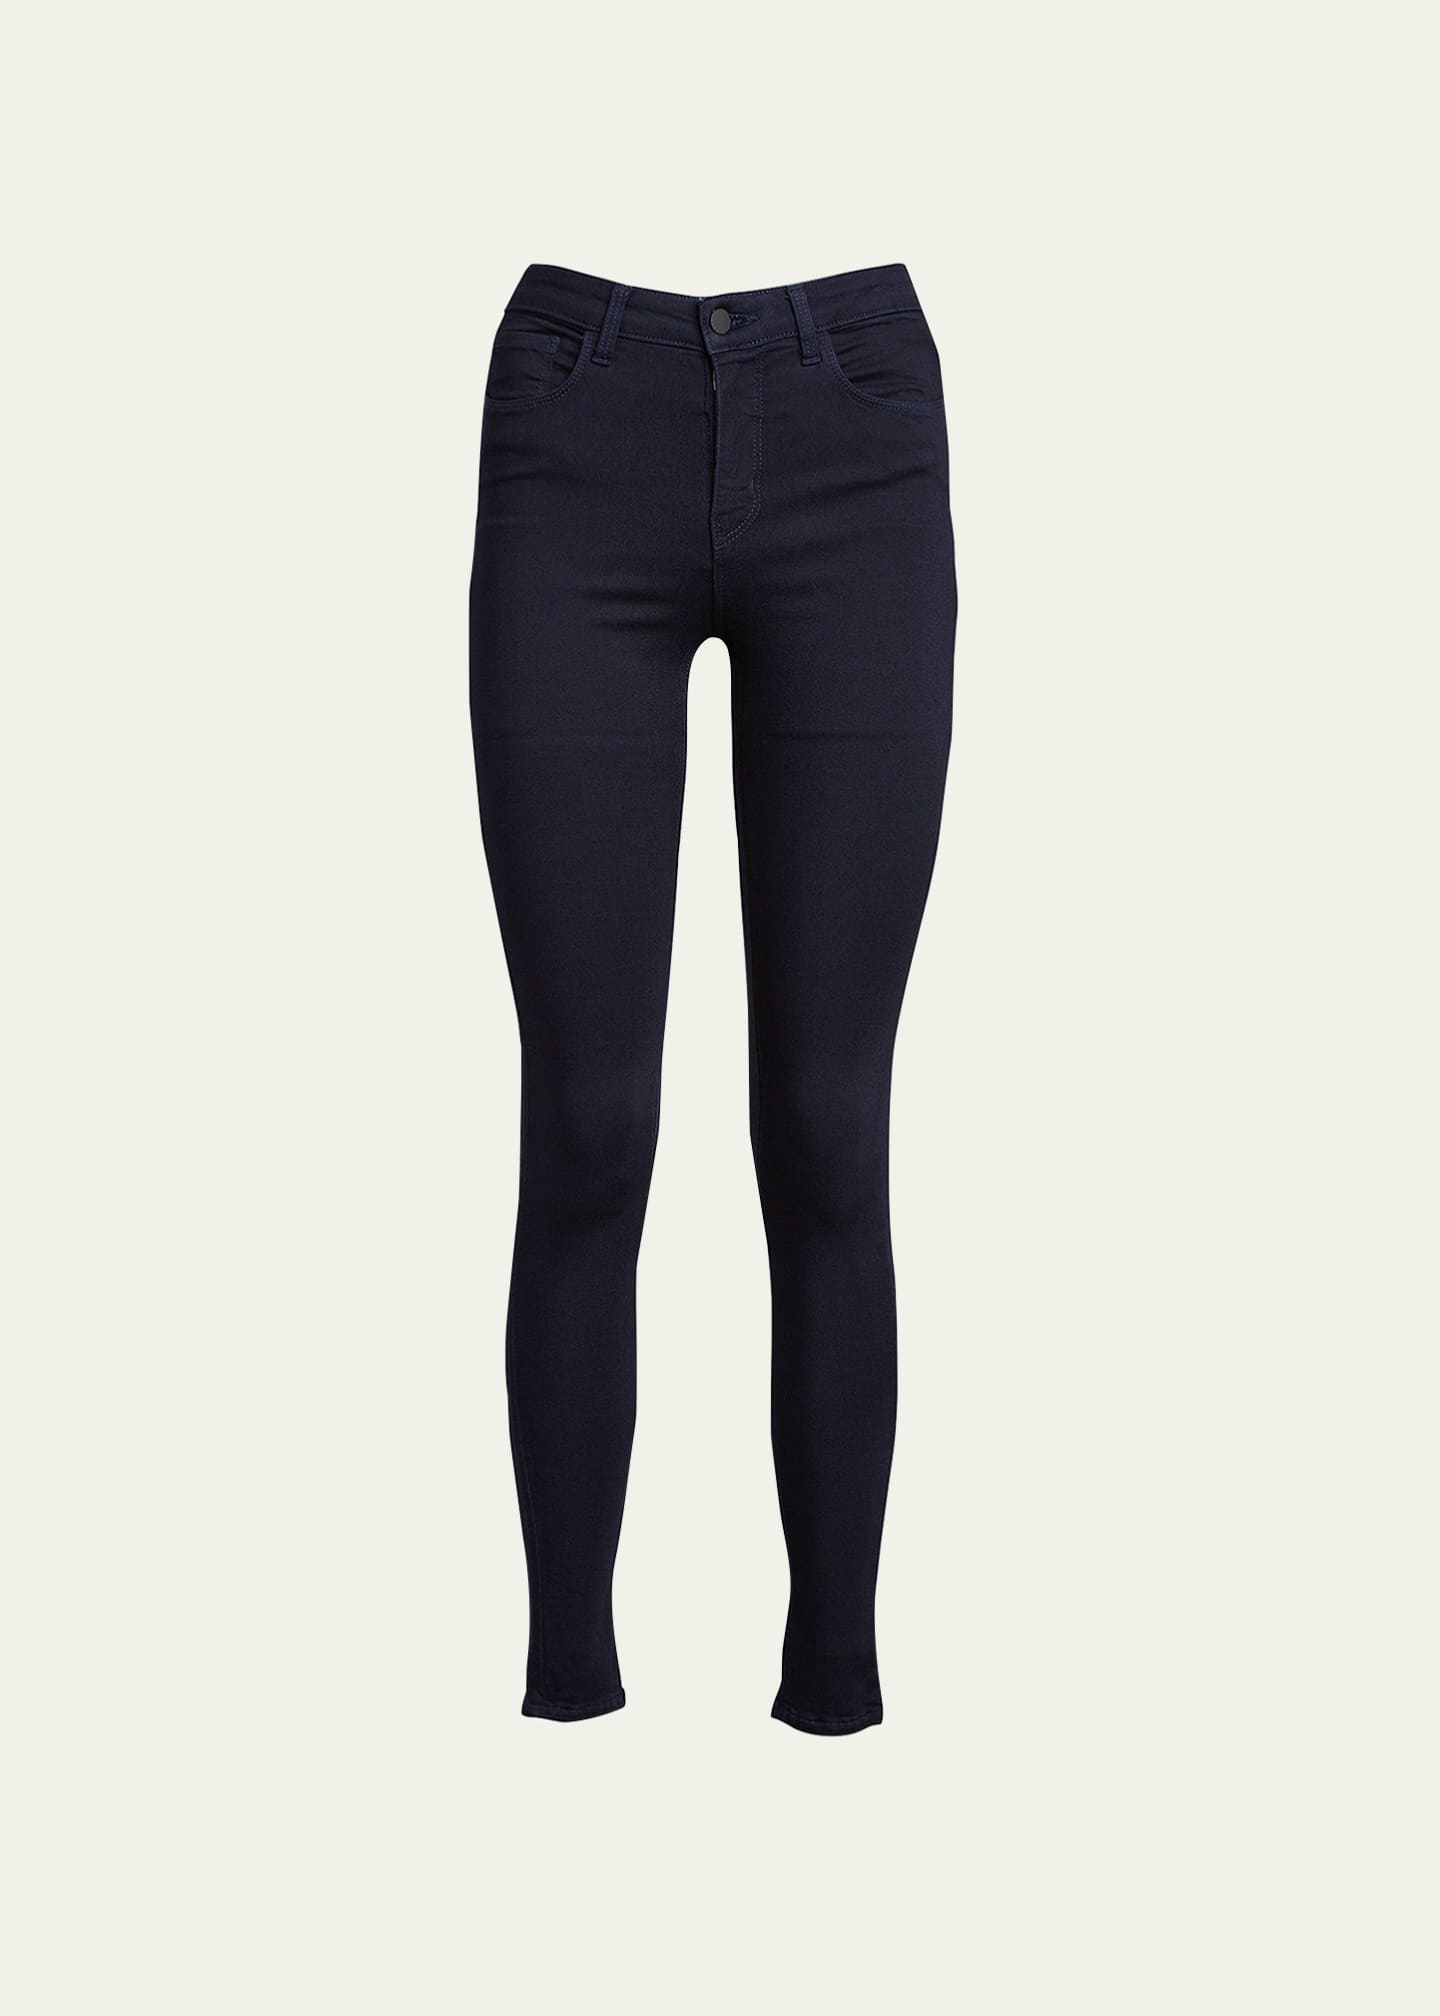 L'Agence Marguerite High-Rise Skinny Jeans Image 1 of 5